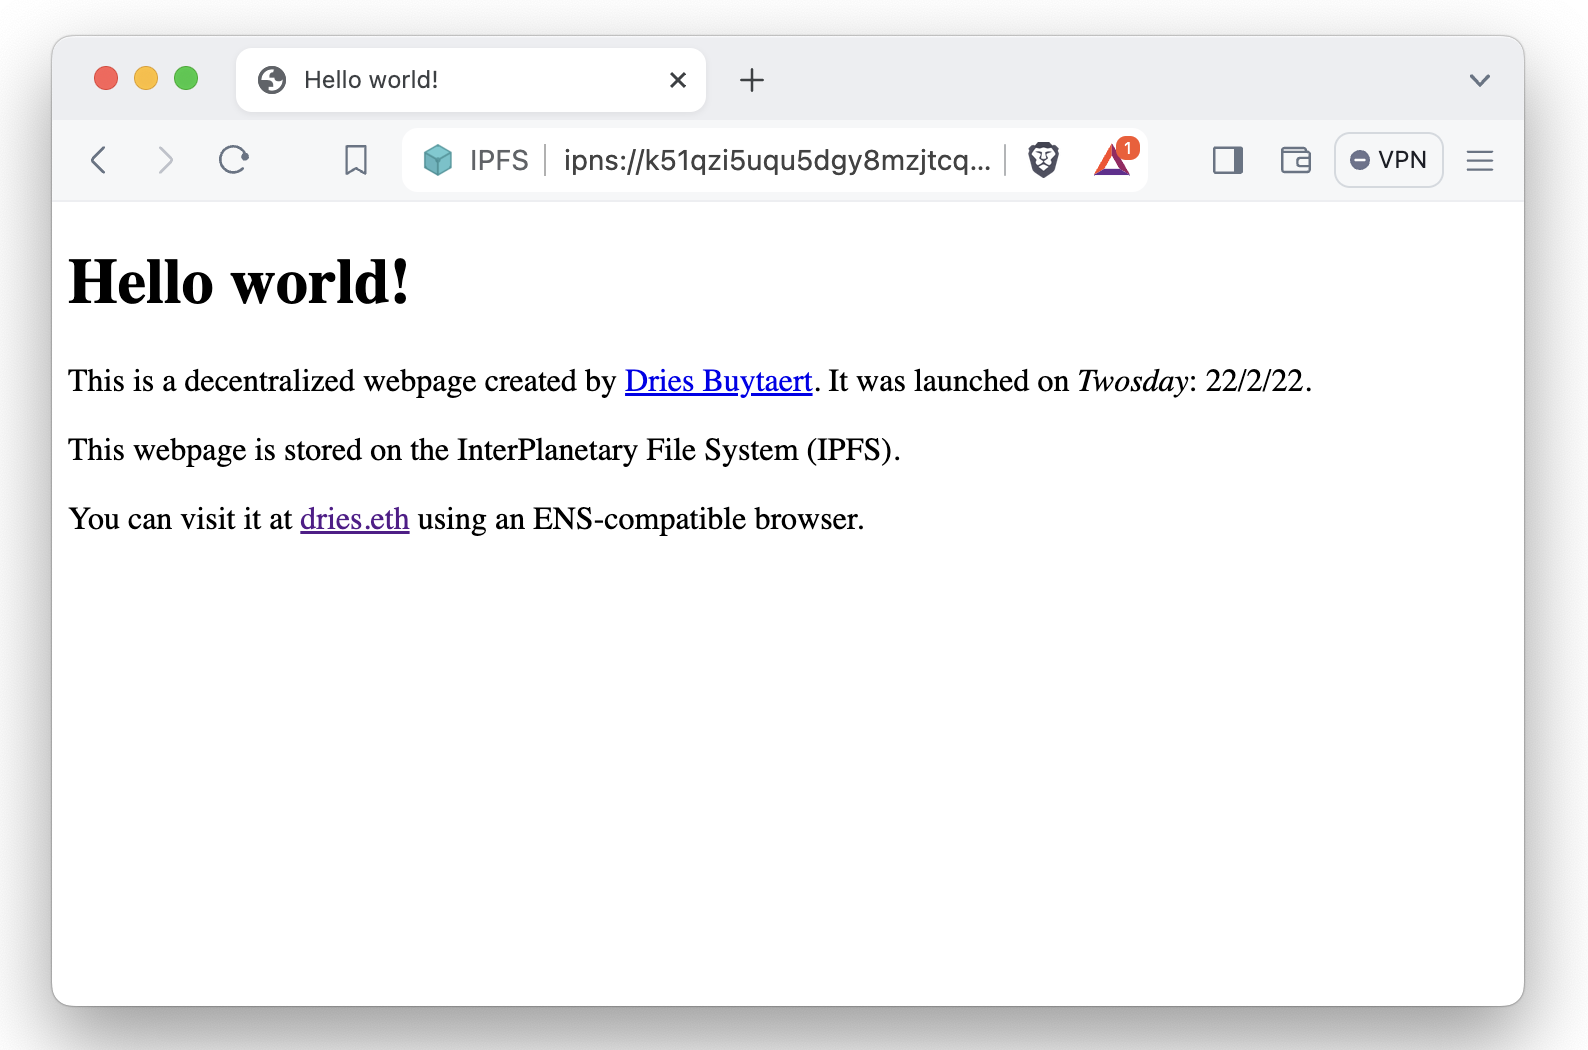 A browser window displaying a simple "Hello world!" webpage on IPNS.